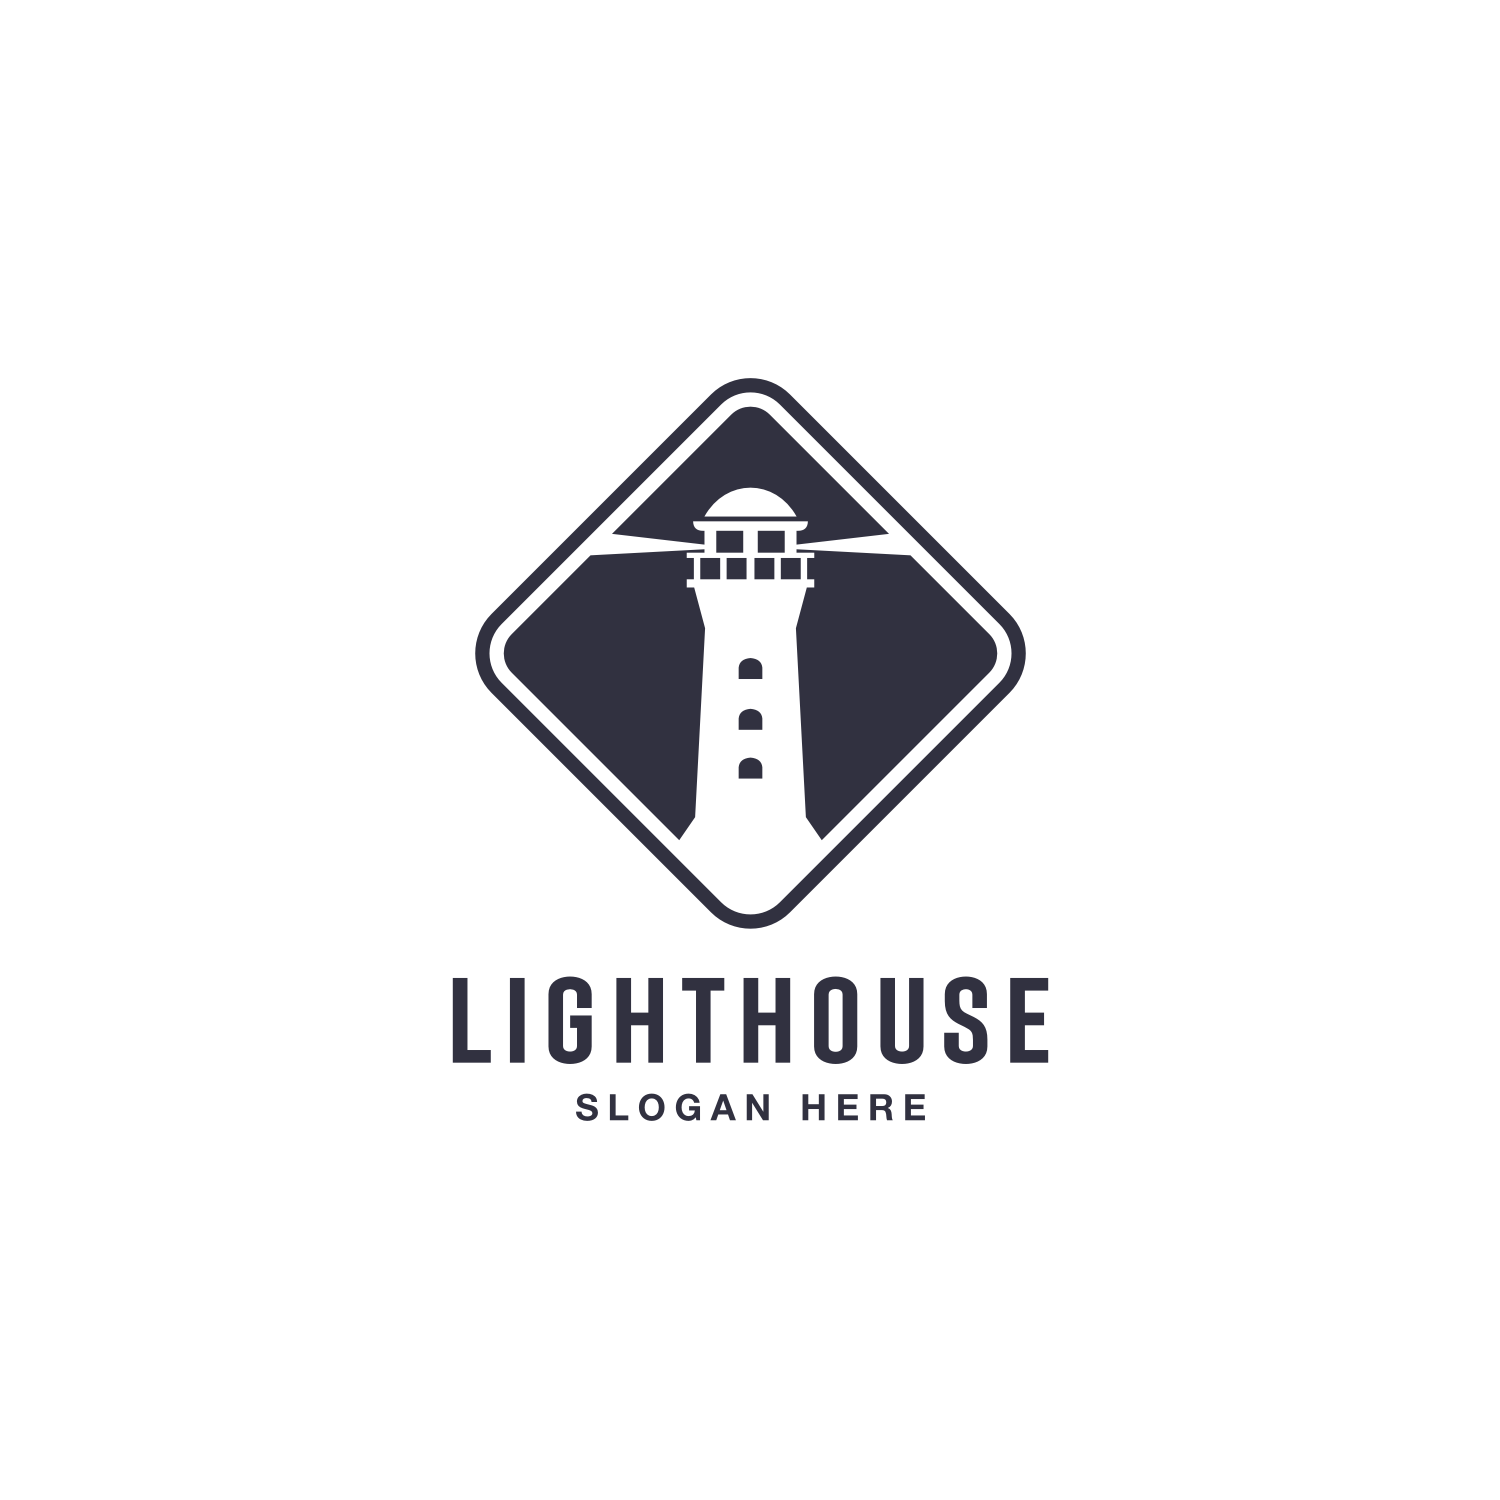 Lighthouse Tower Simple Logo Design cover image.